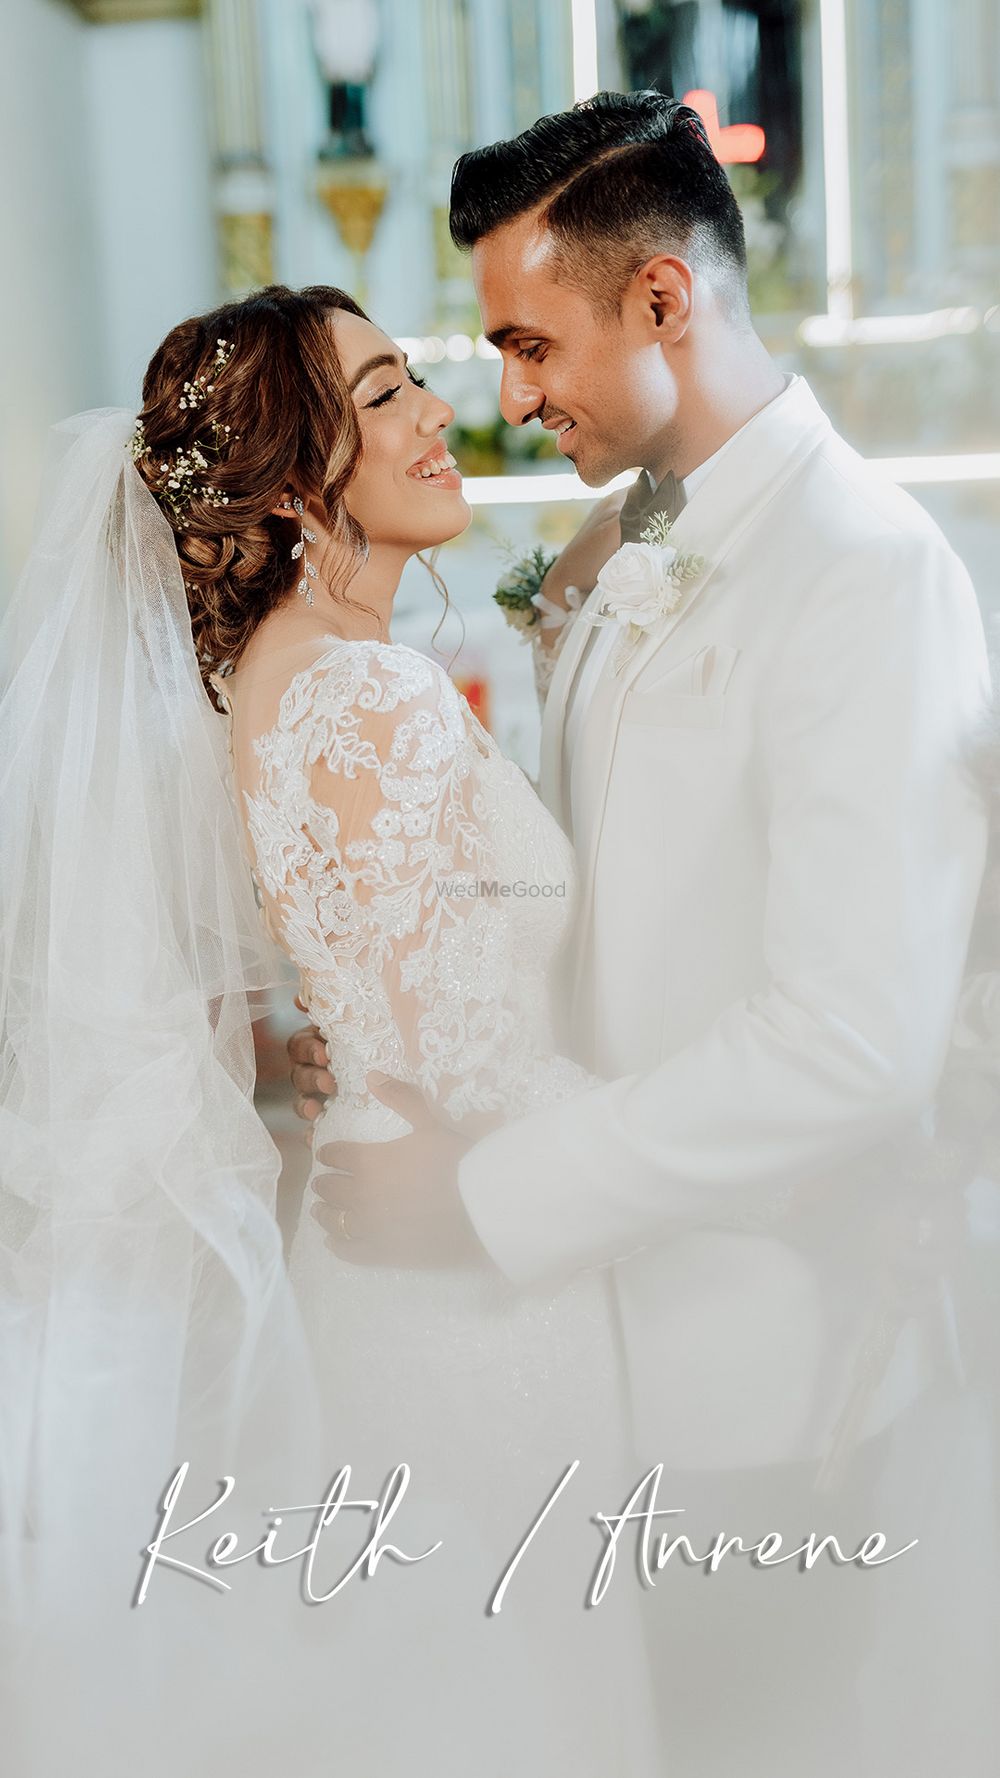 Photo From Keith & Anrene - By The Photo Store